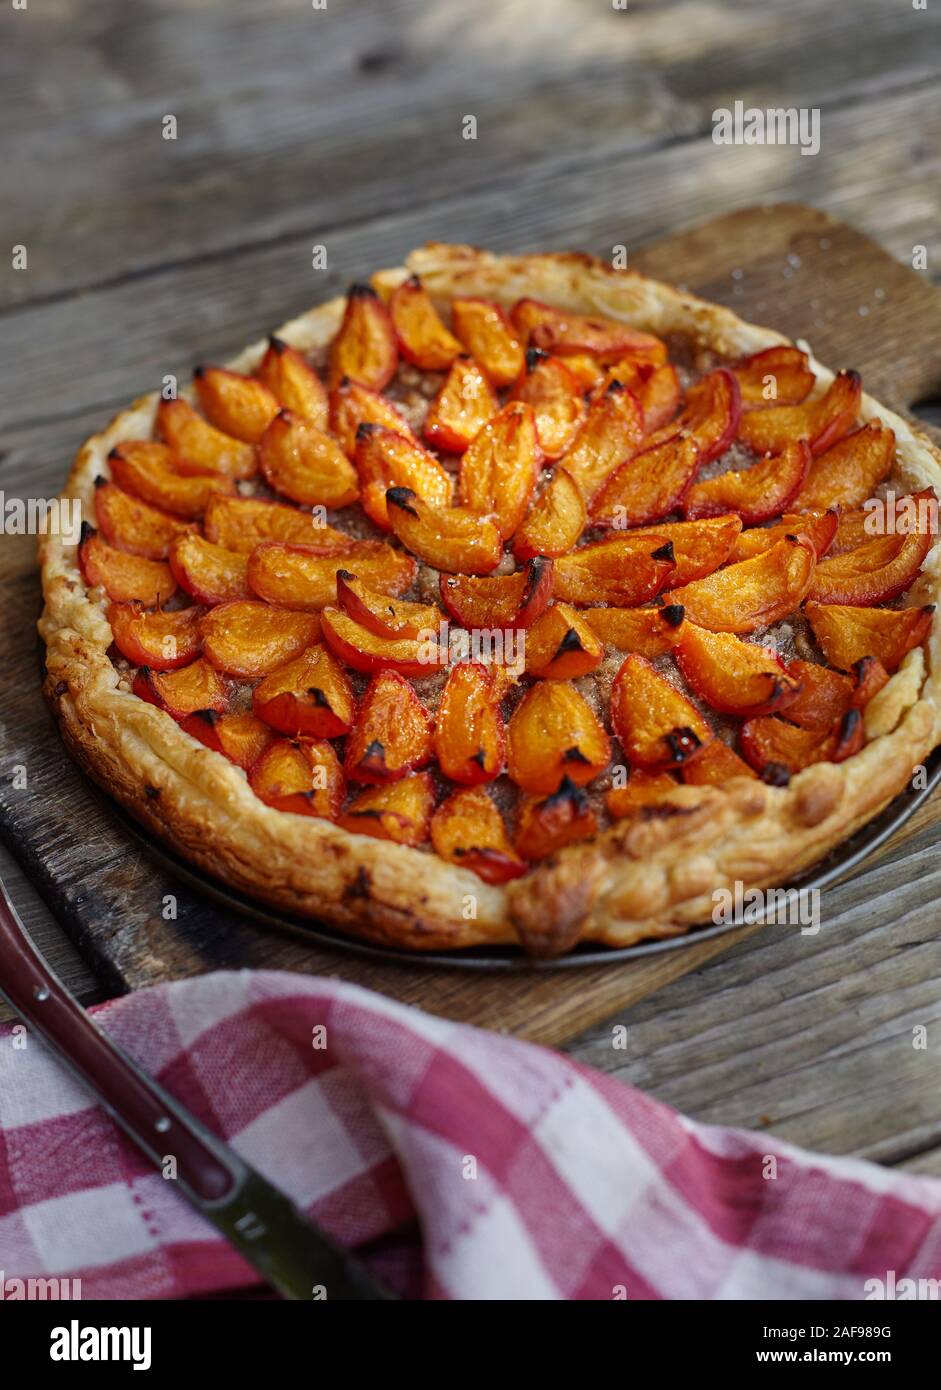 Delicious Apricot almond cake on puff pastry. Stock Photo